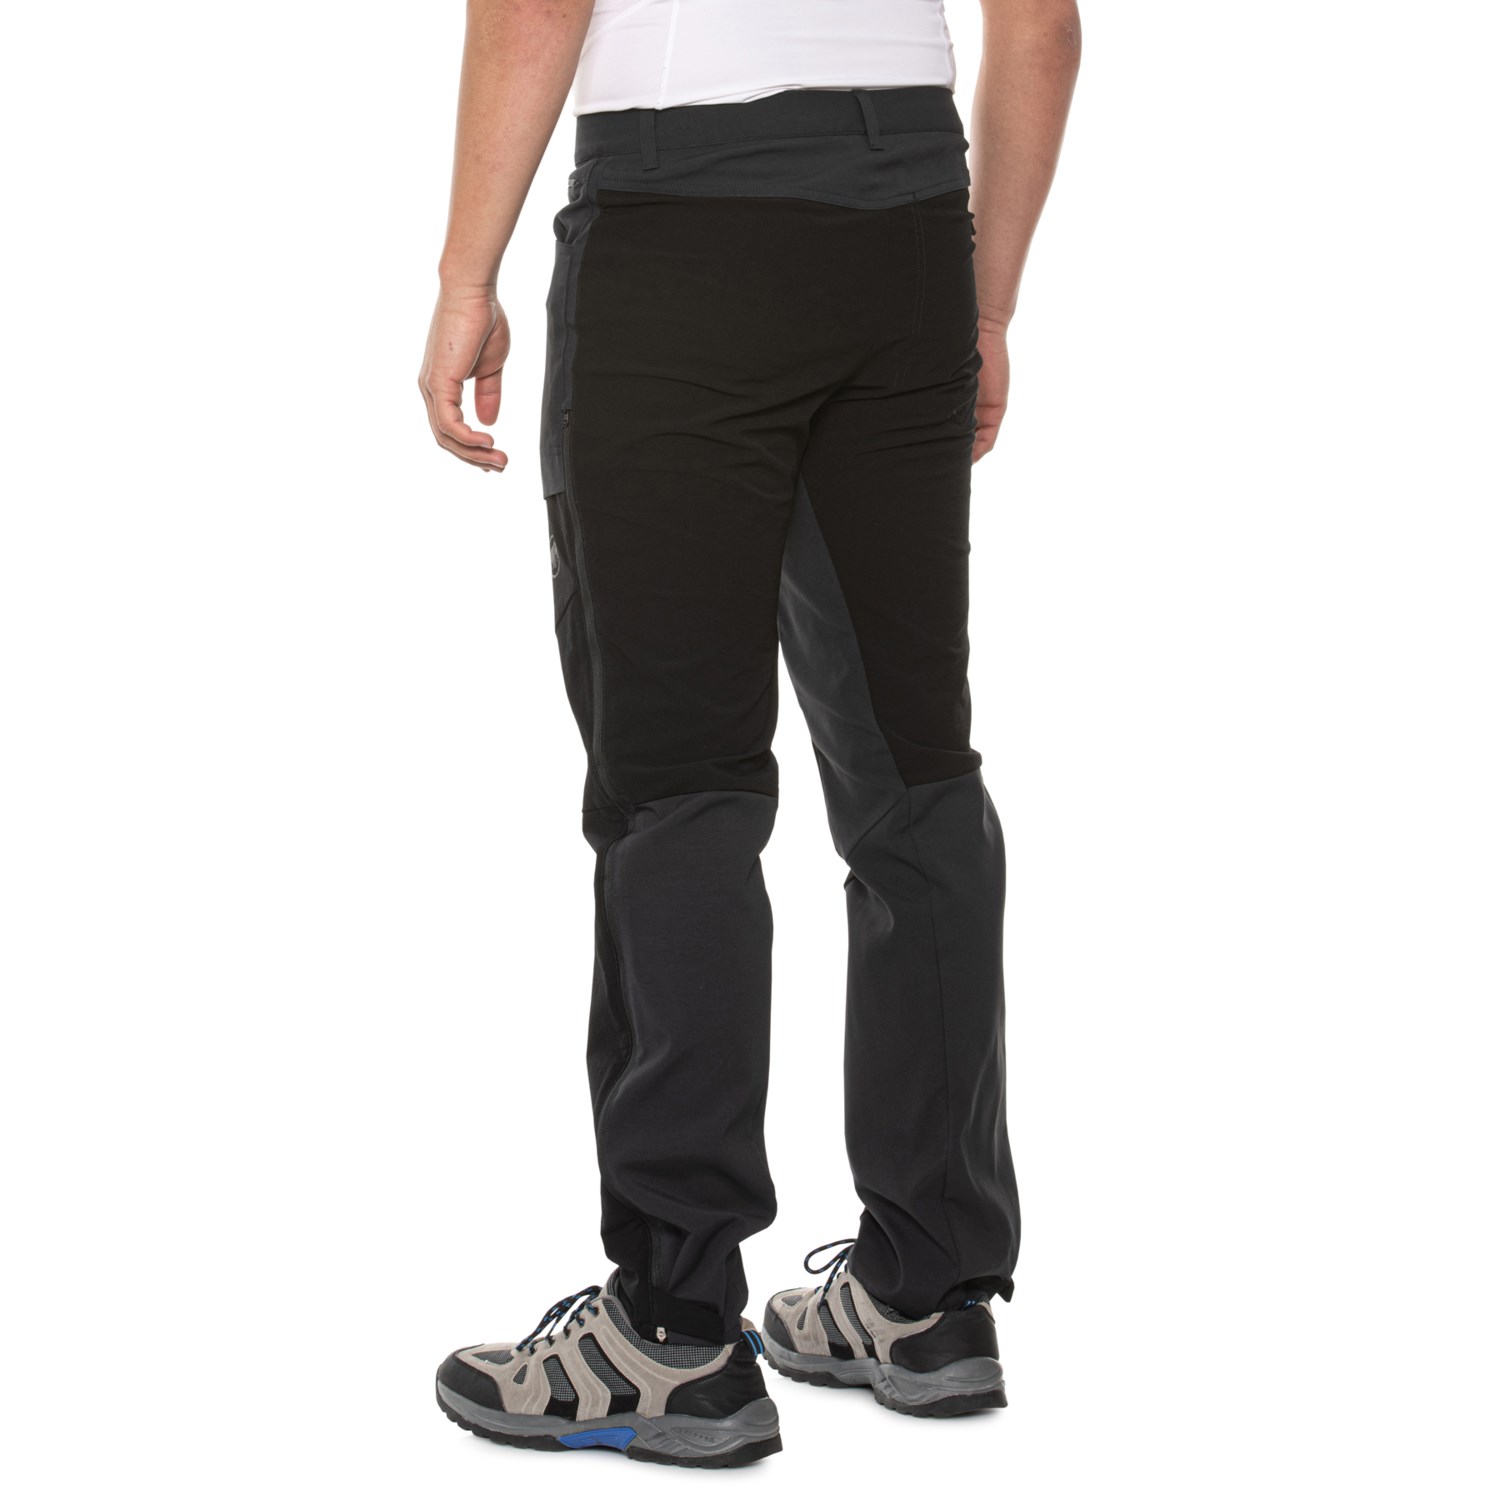 Mammut Zinal Guide Pants (For Men) - Save 50%